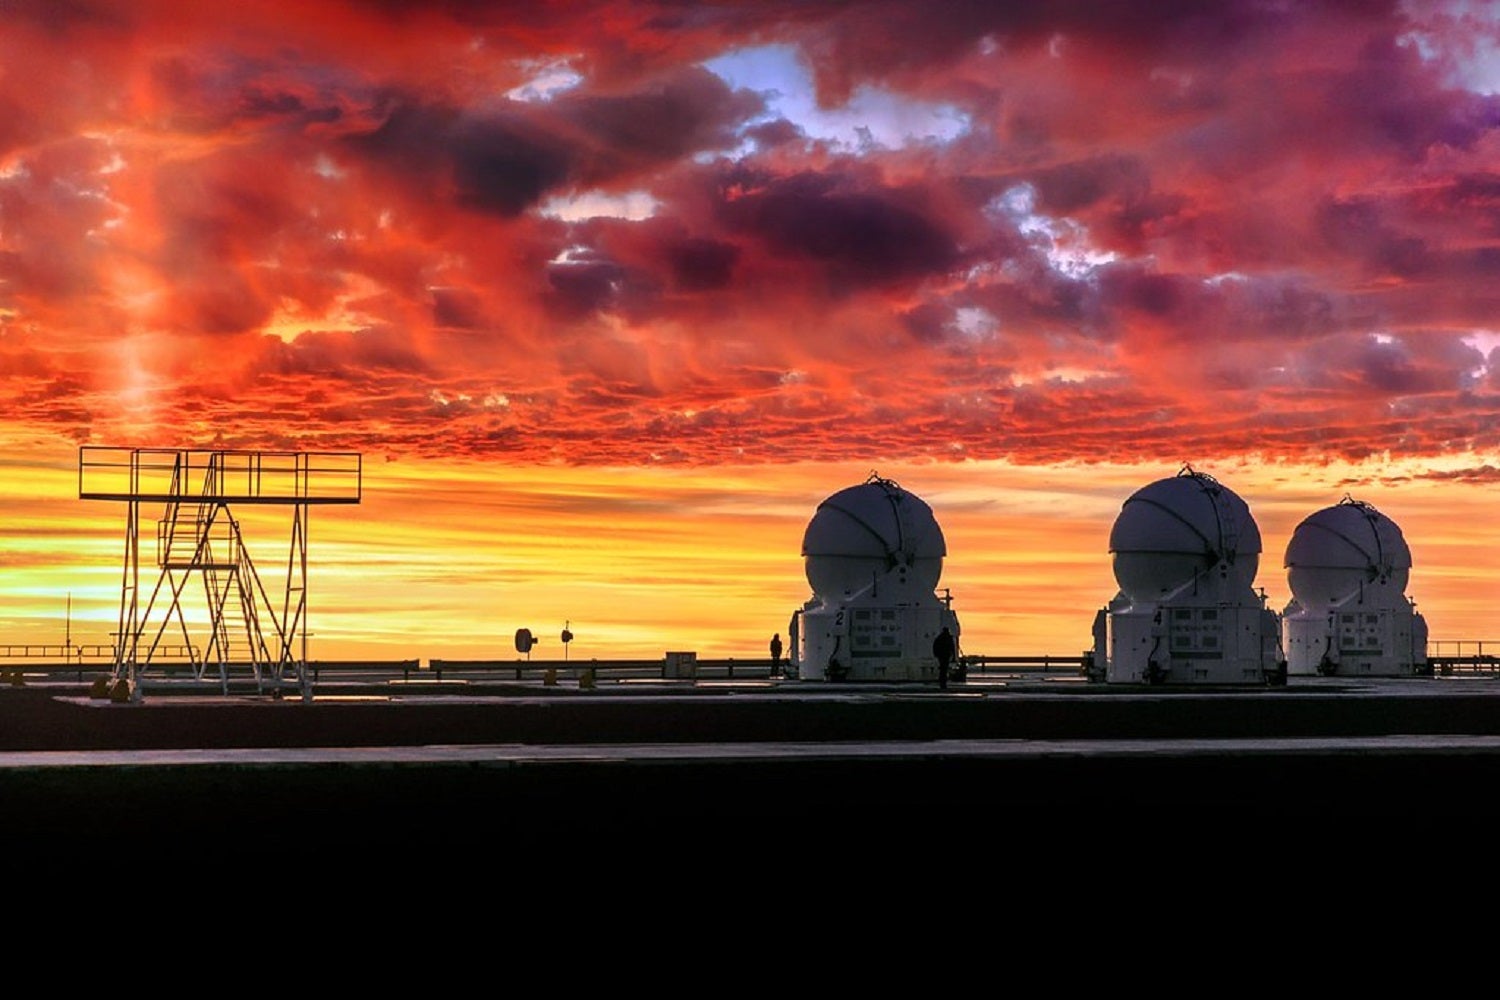 three large telescope observatories with the sun setting behind them